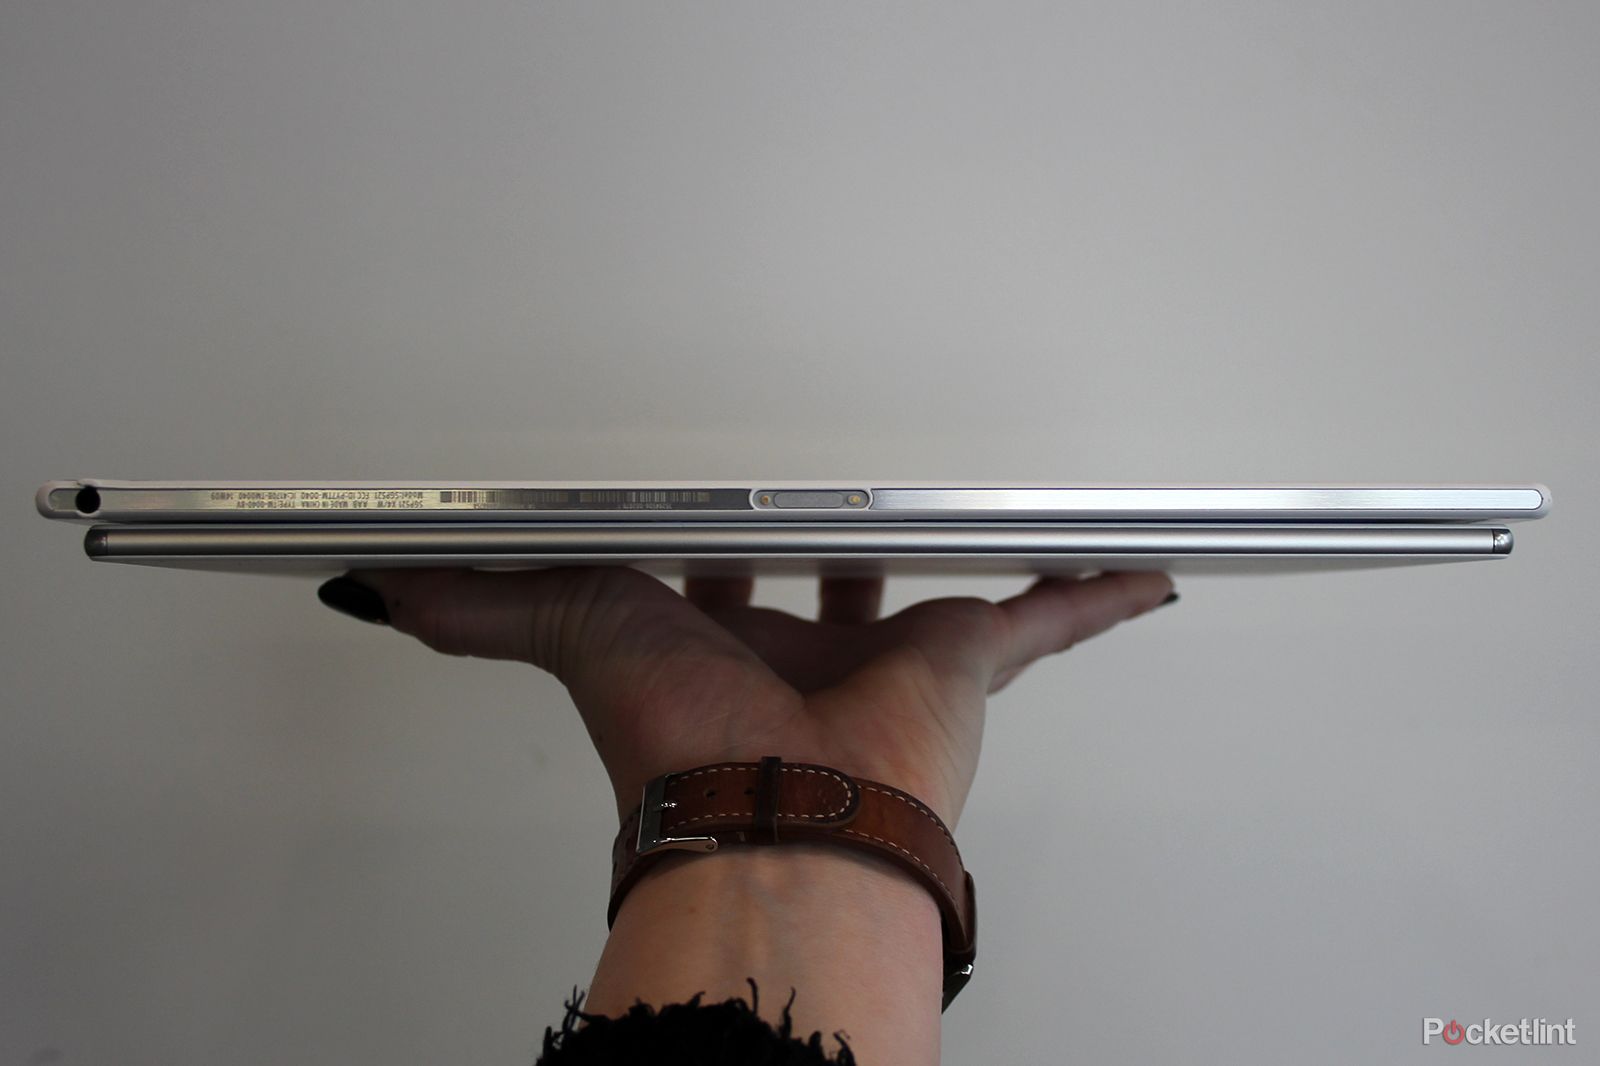 sony xperia z4 tablet hands on slimmer lighter and sexier image 5